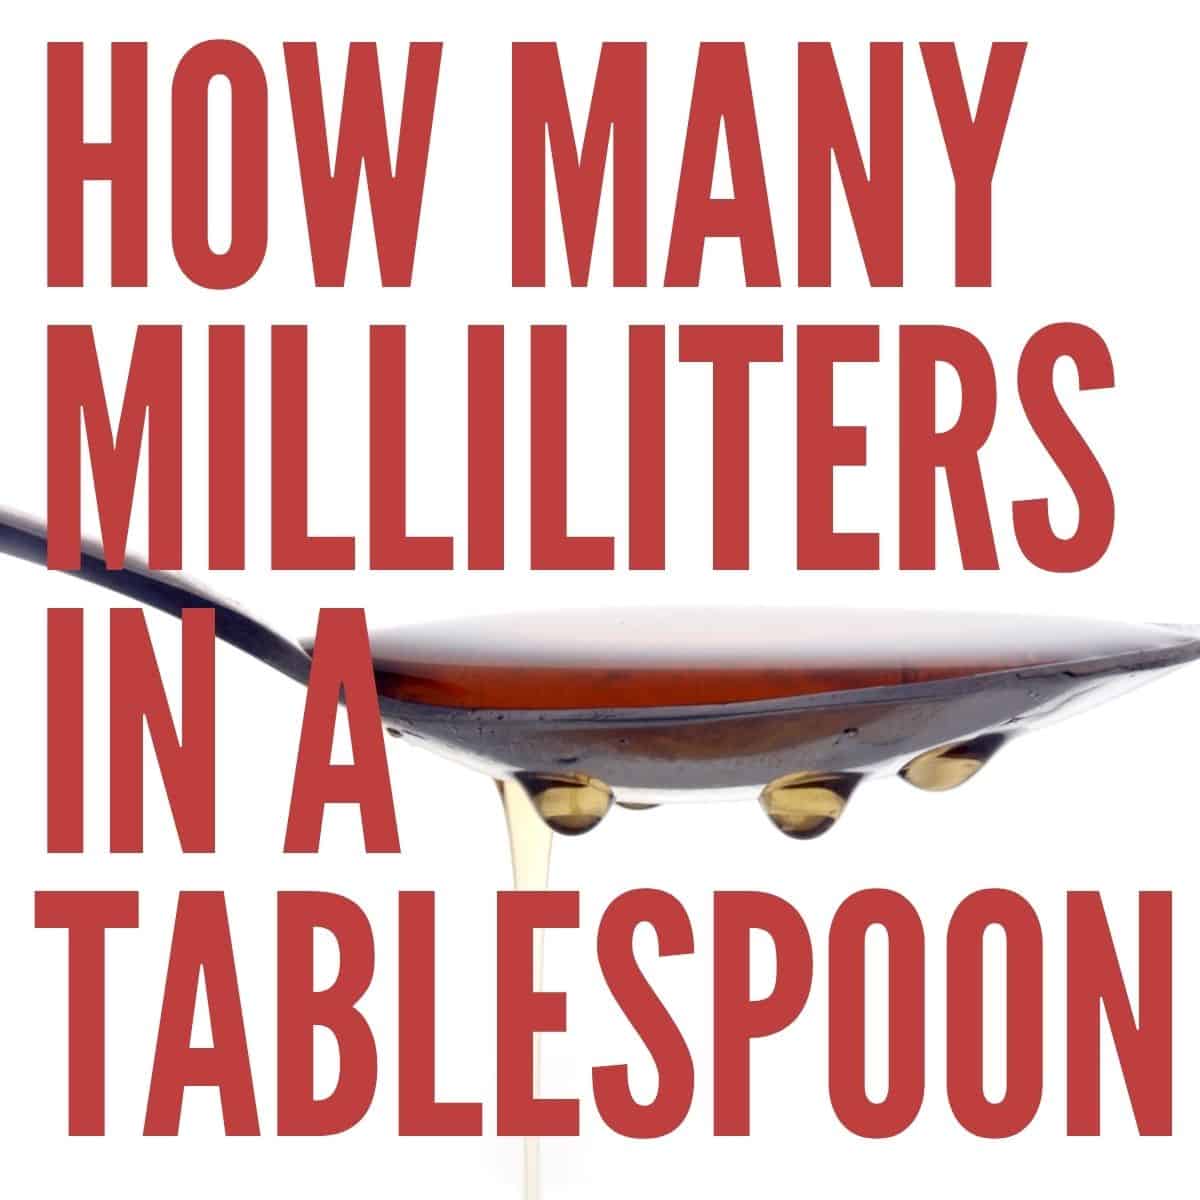 How Many Milliliters are in a Tablespoon